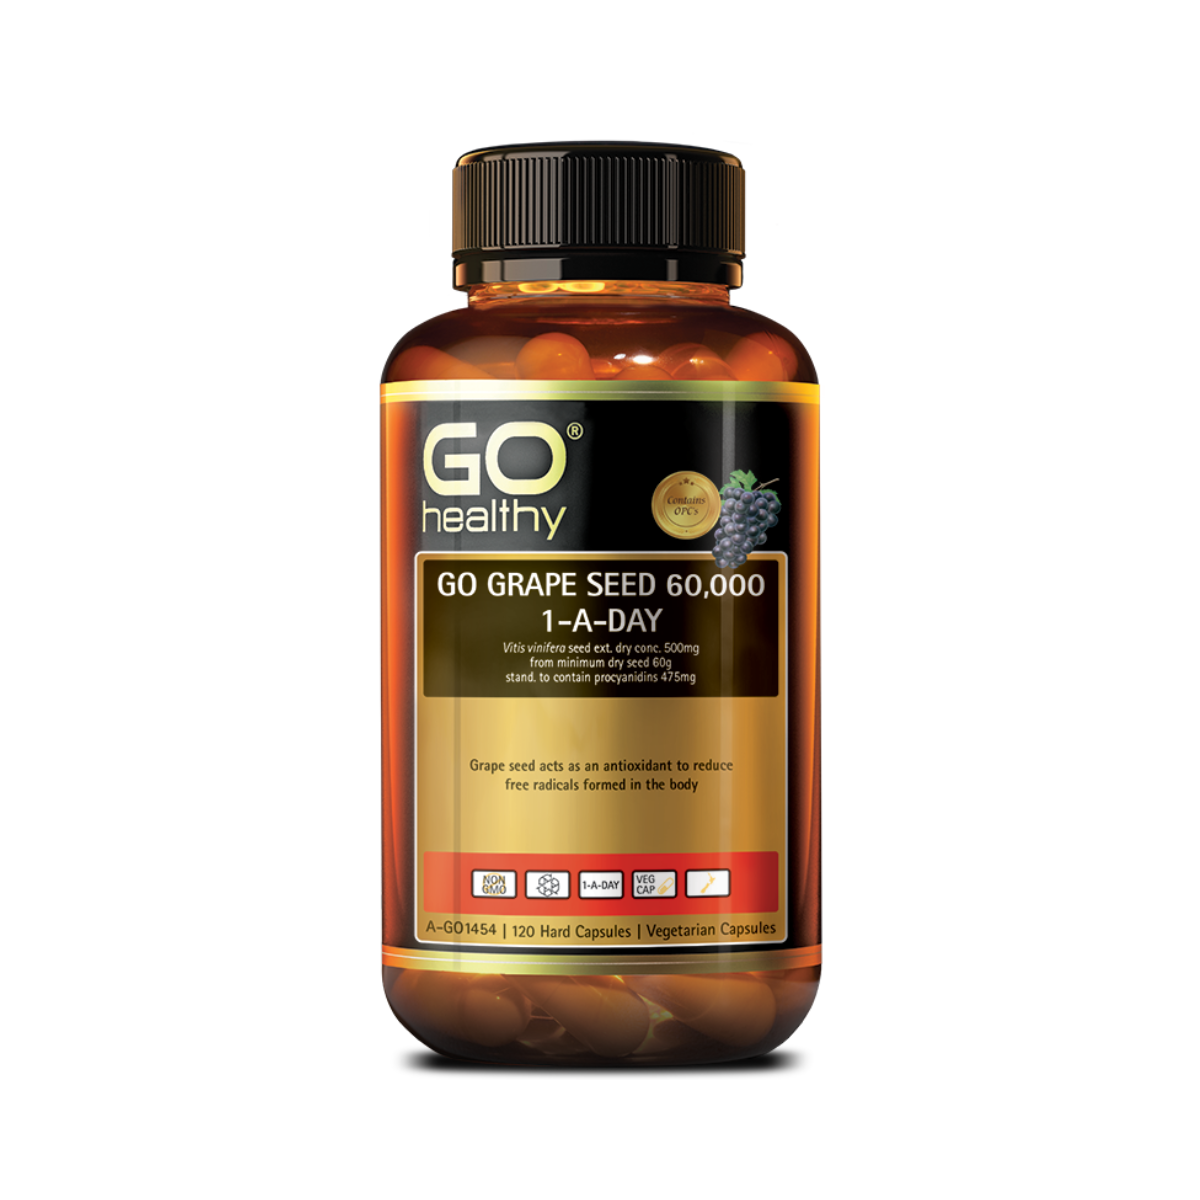 Go Healthy Grape Seed 60,000mg 1-A-DAY 120 Capsules